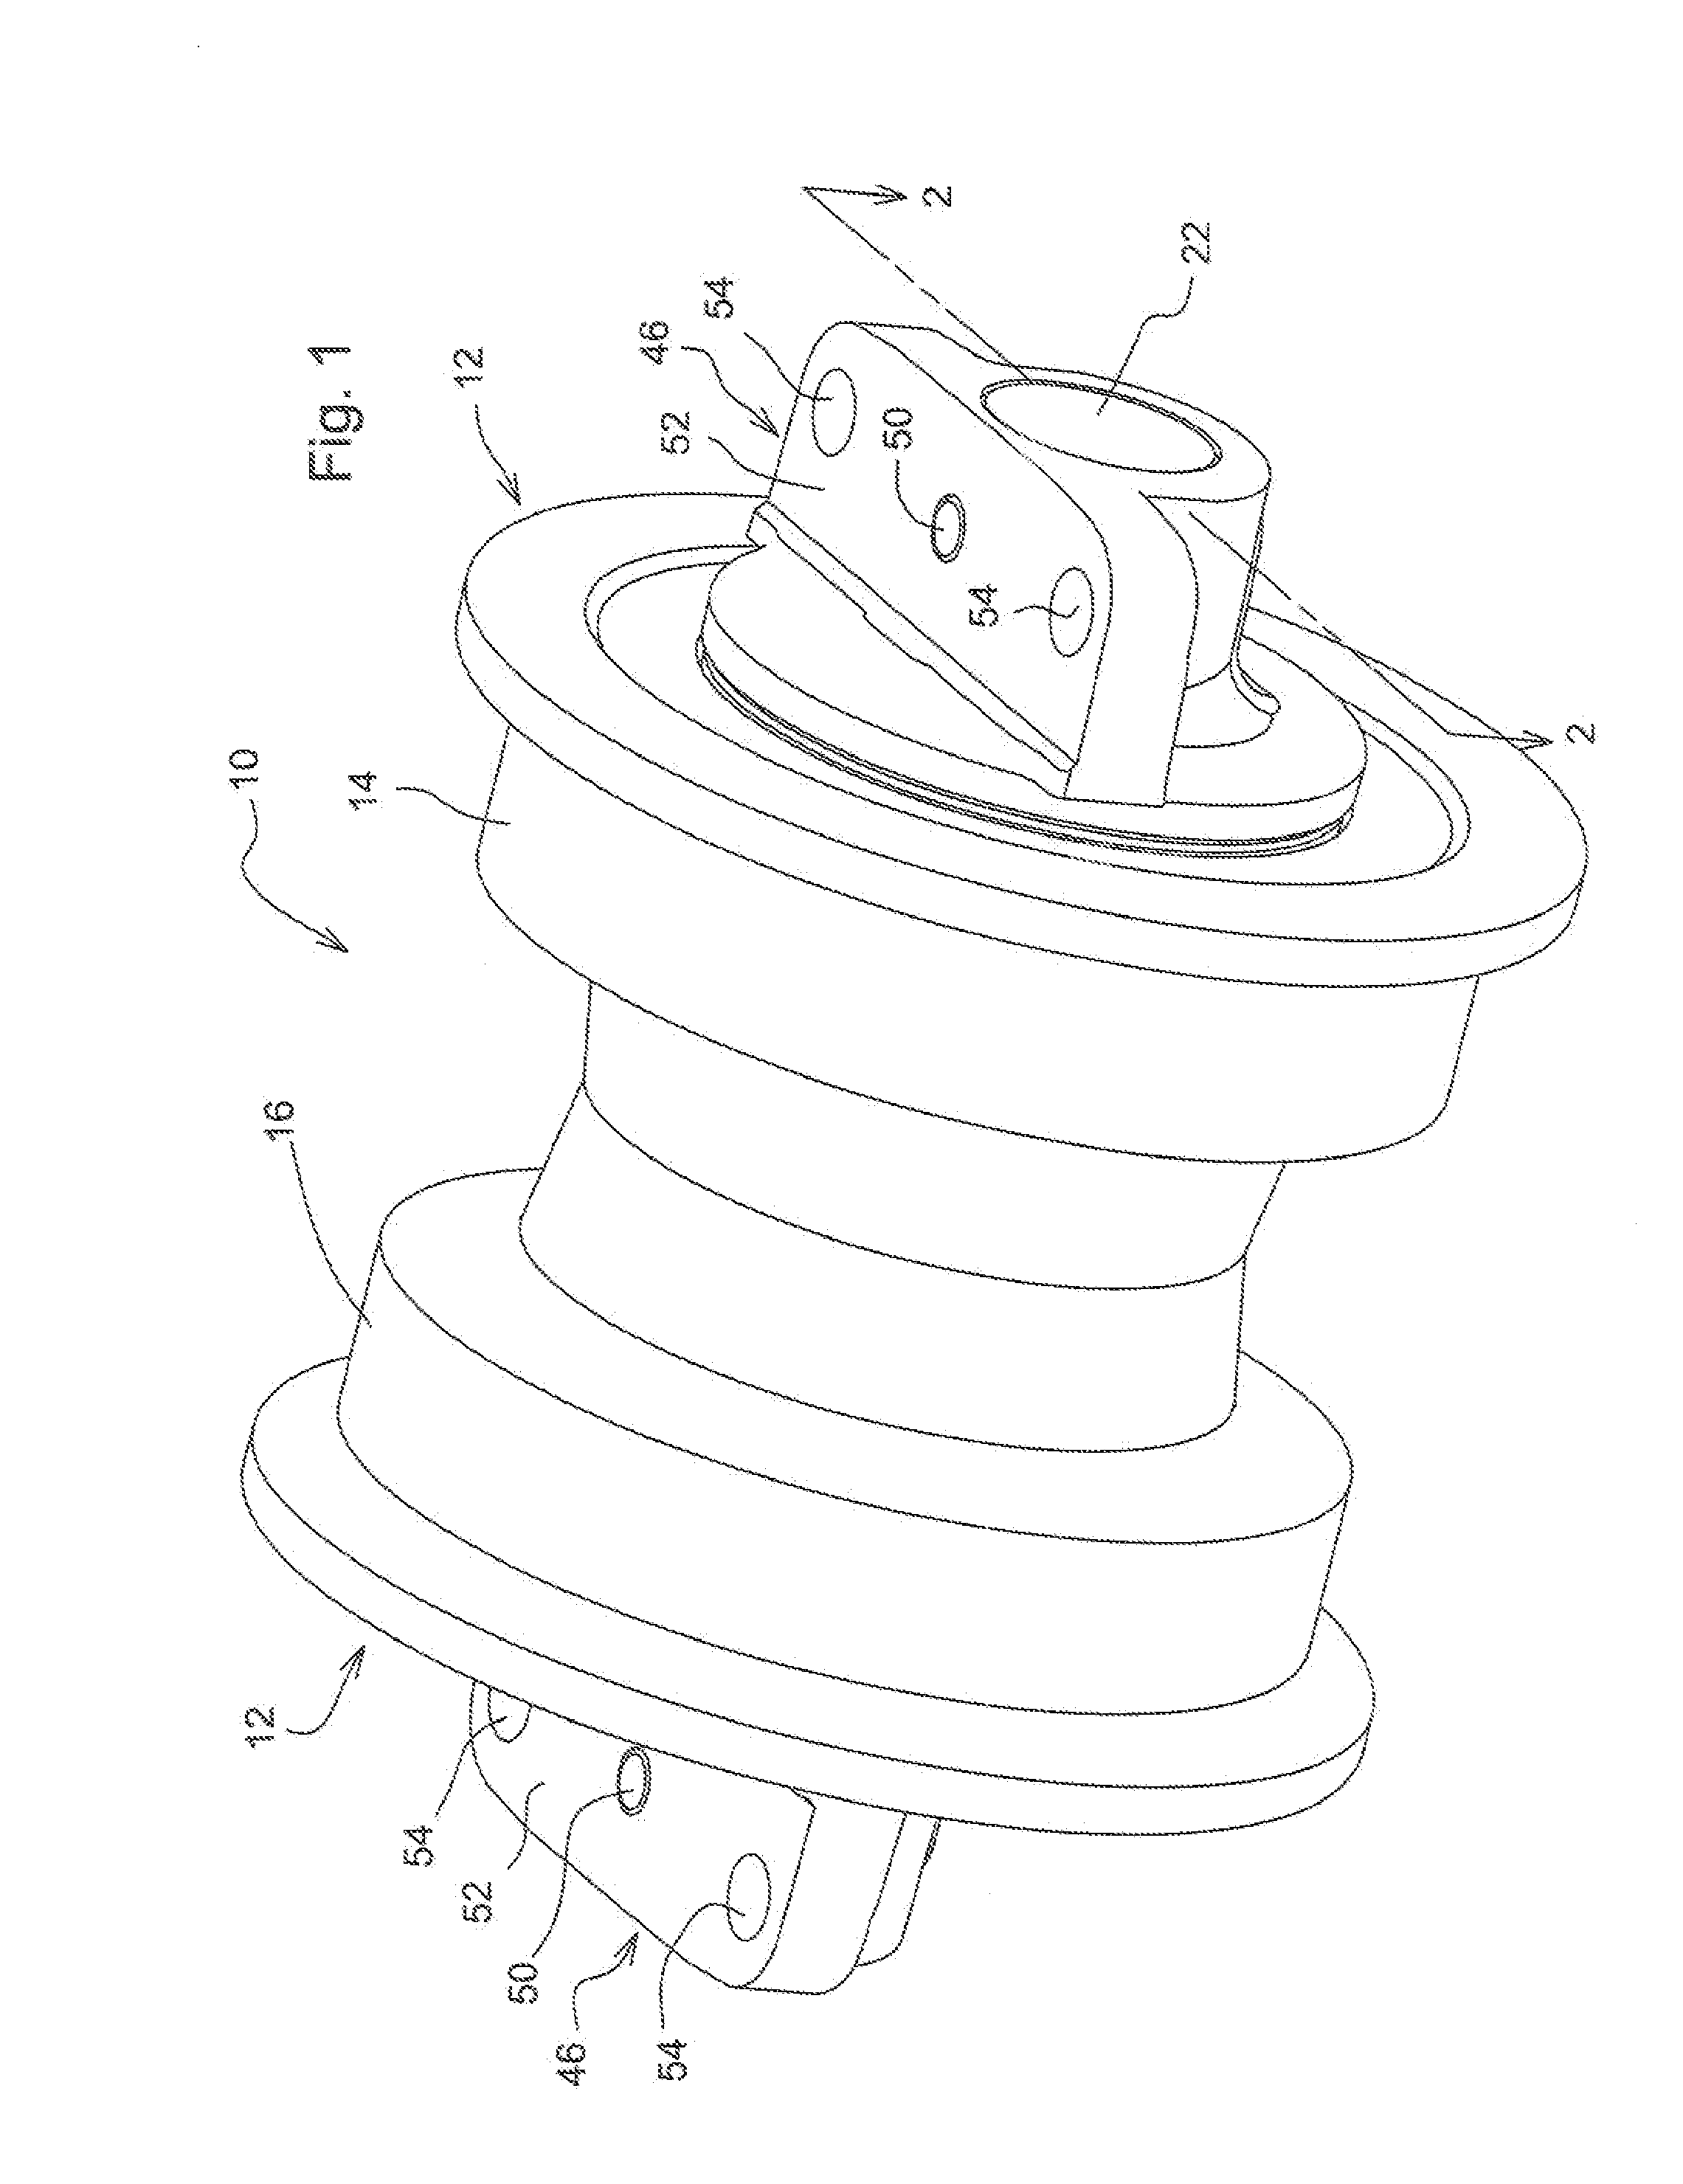 Crawler track roller with internal spherical spacers